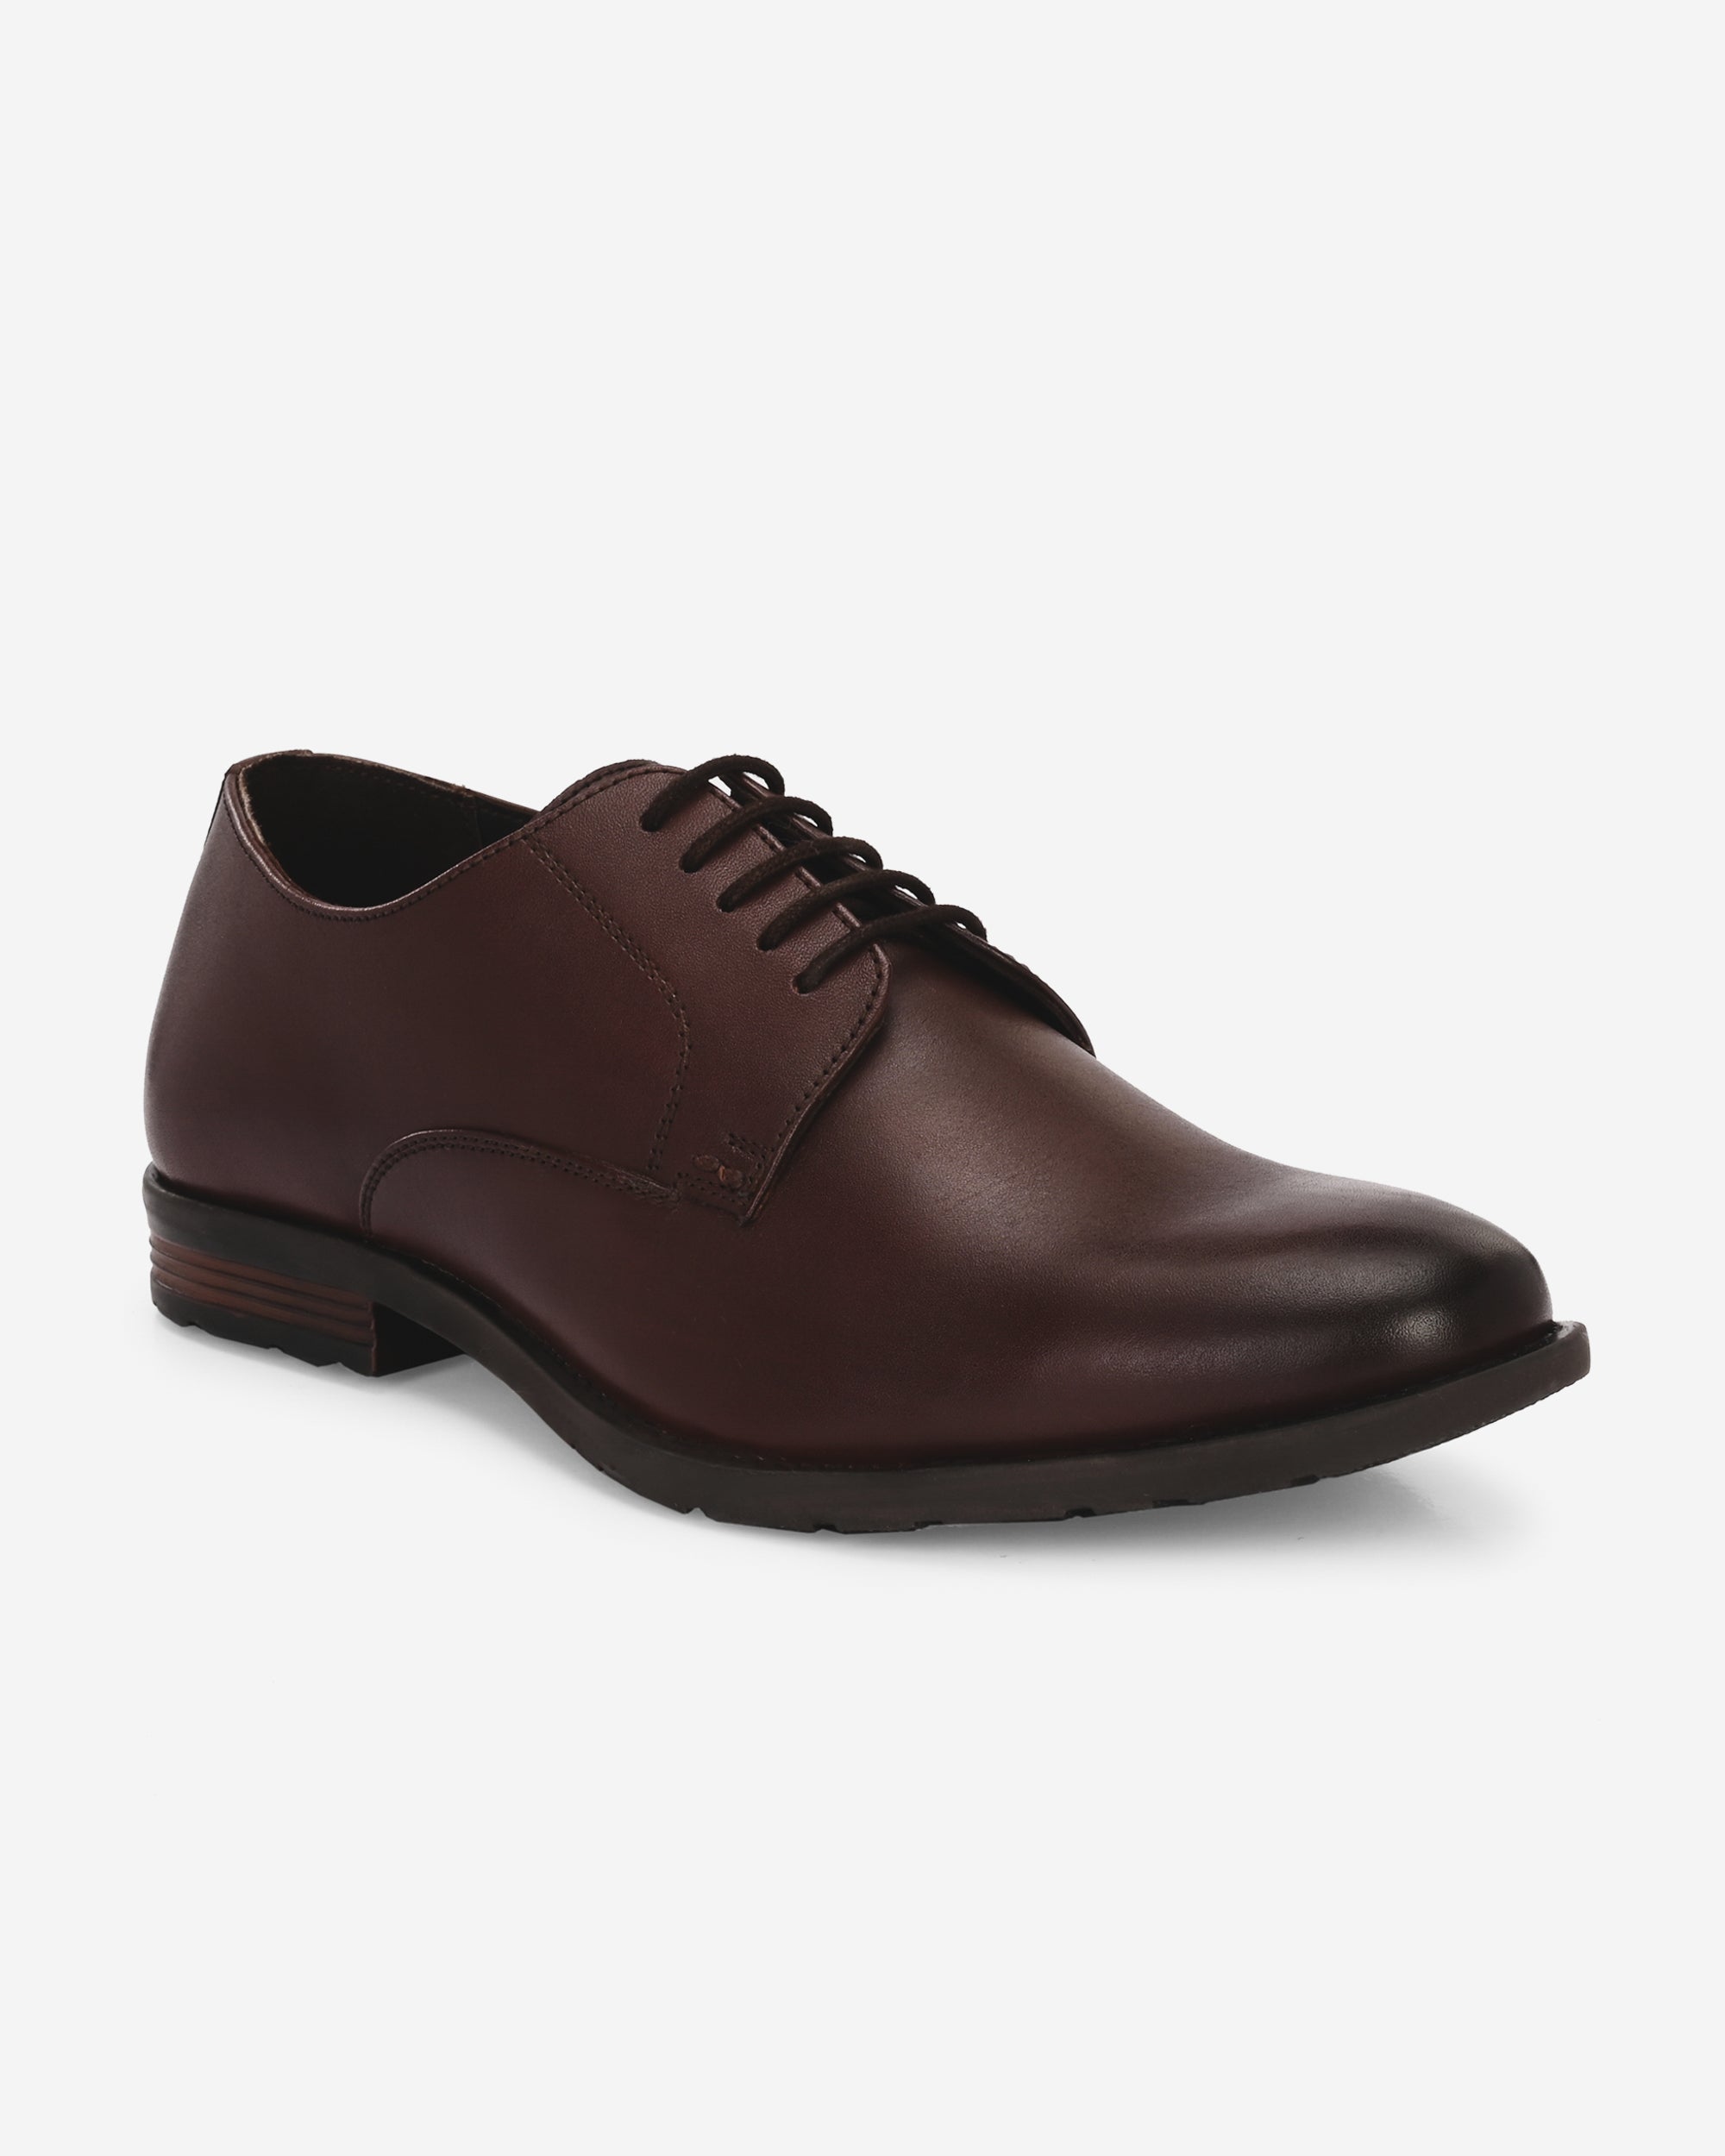 JACOB DARK BROWN LACE UP SHOES